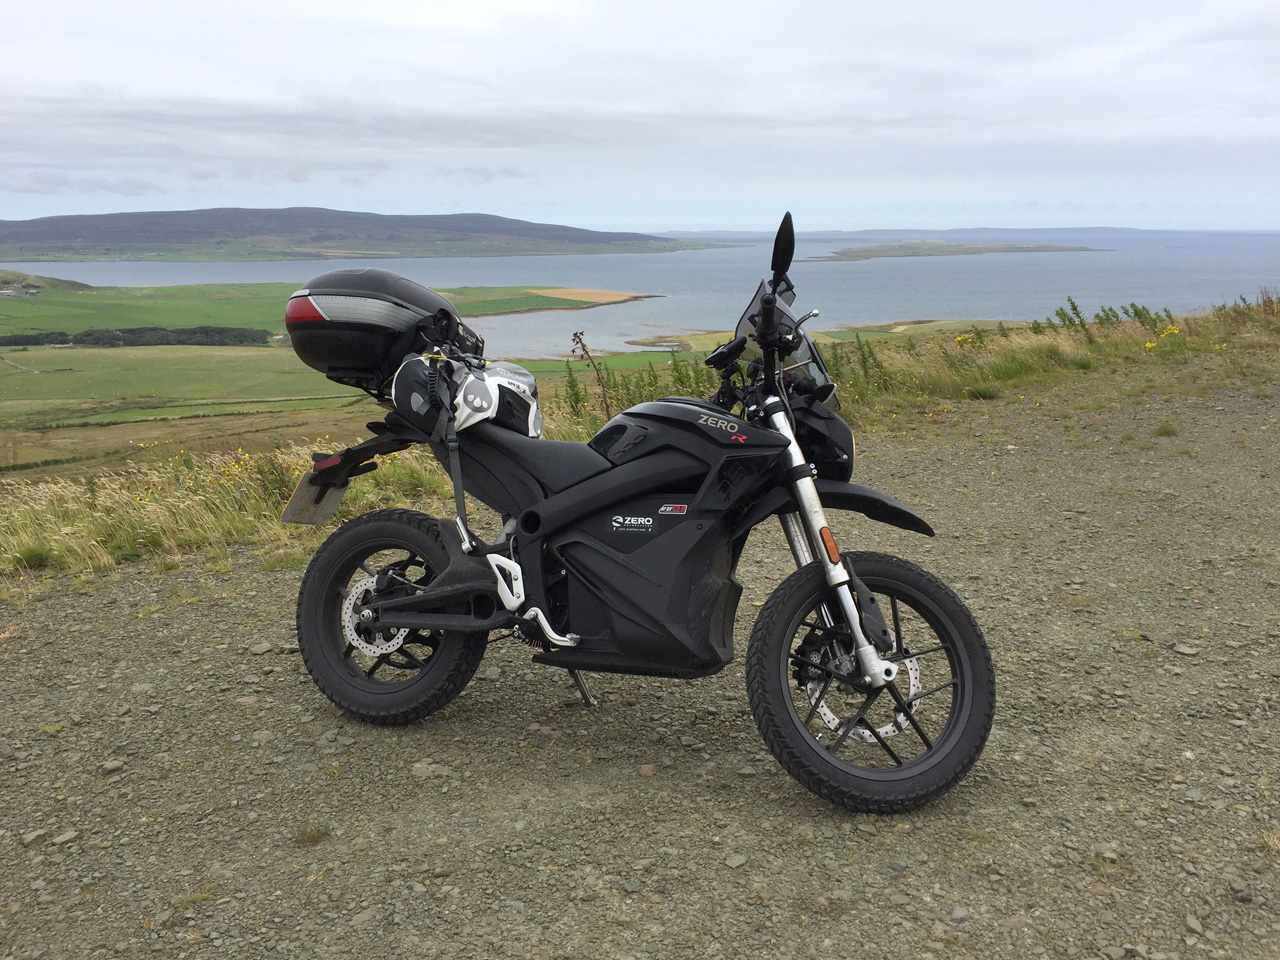 John Chivers' Zero DSR electric motorcycle at Hammars Hill wind farm, Orkney.